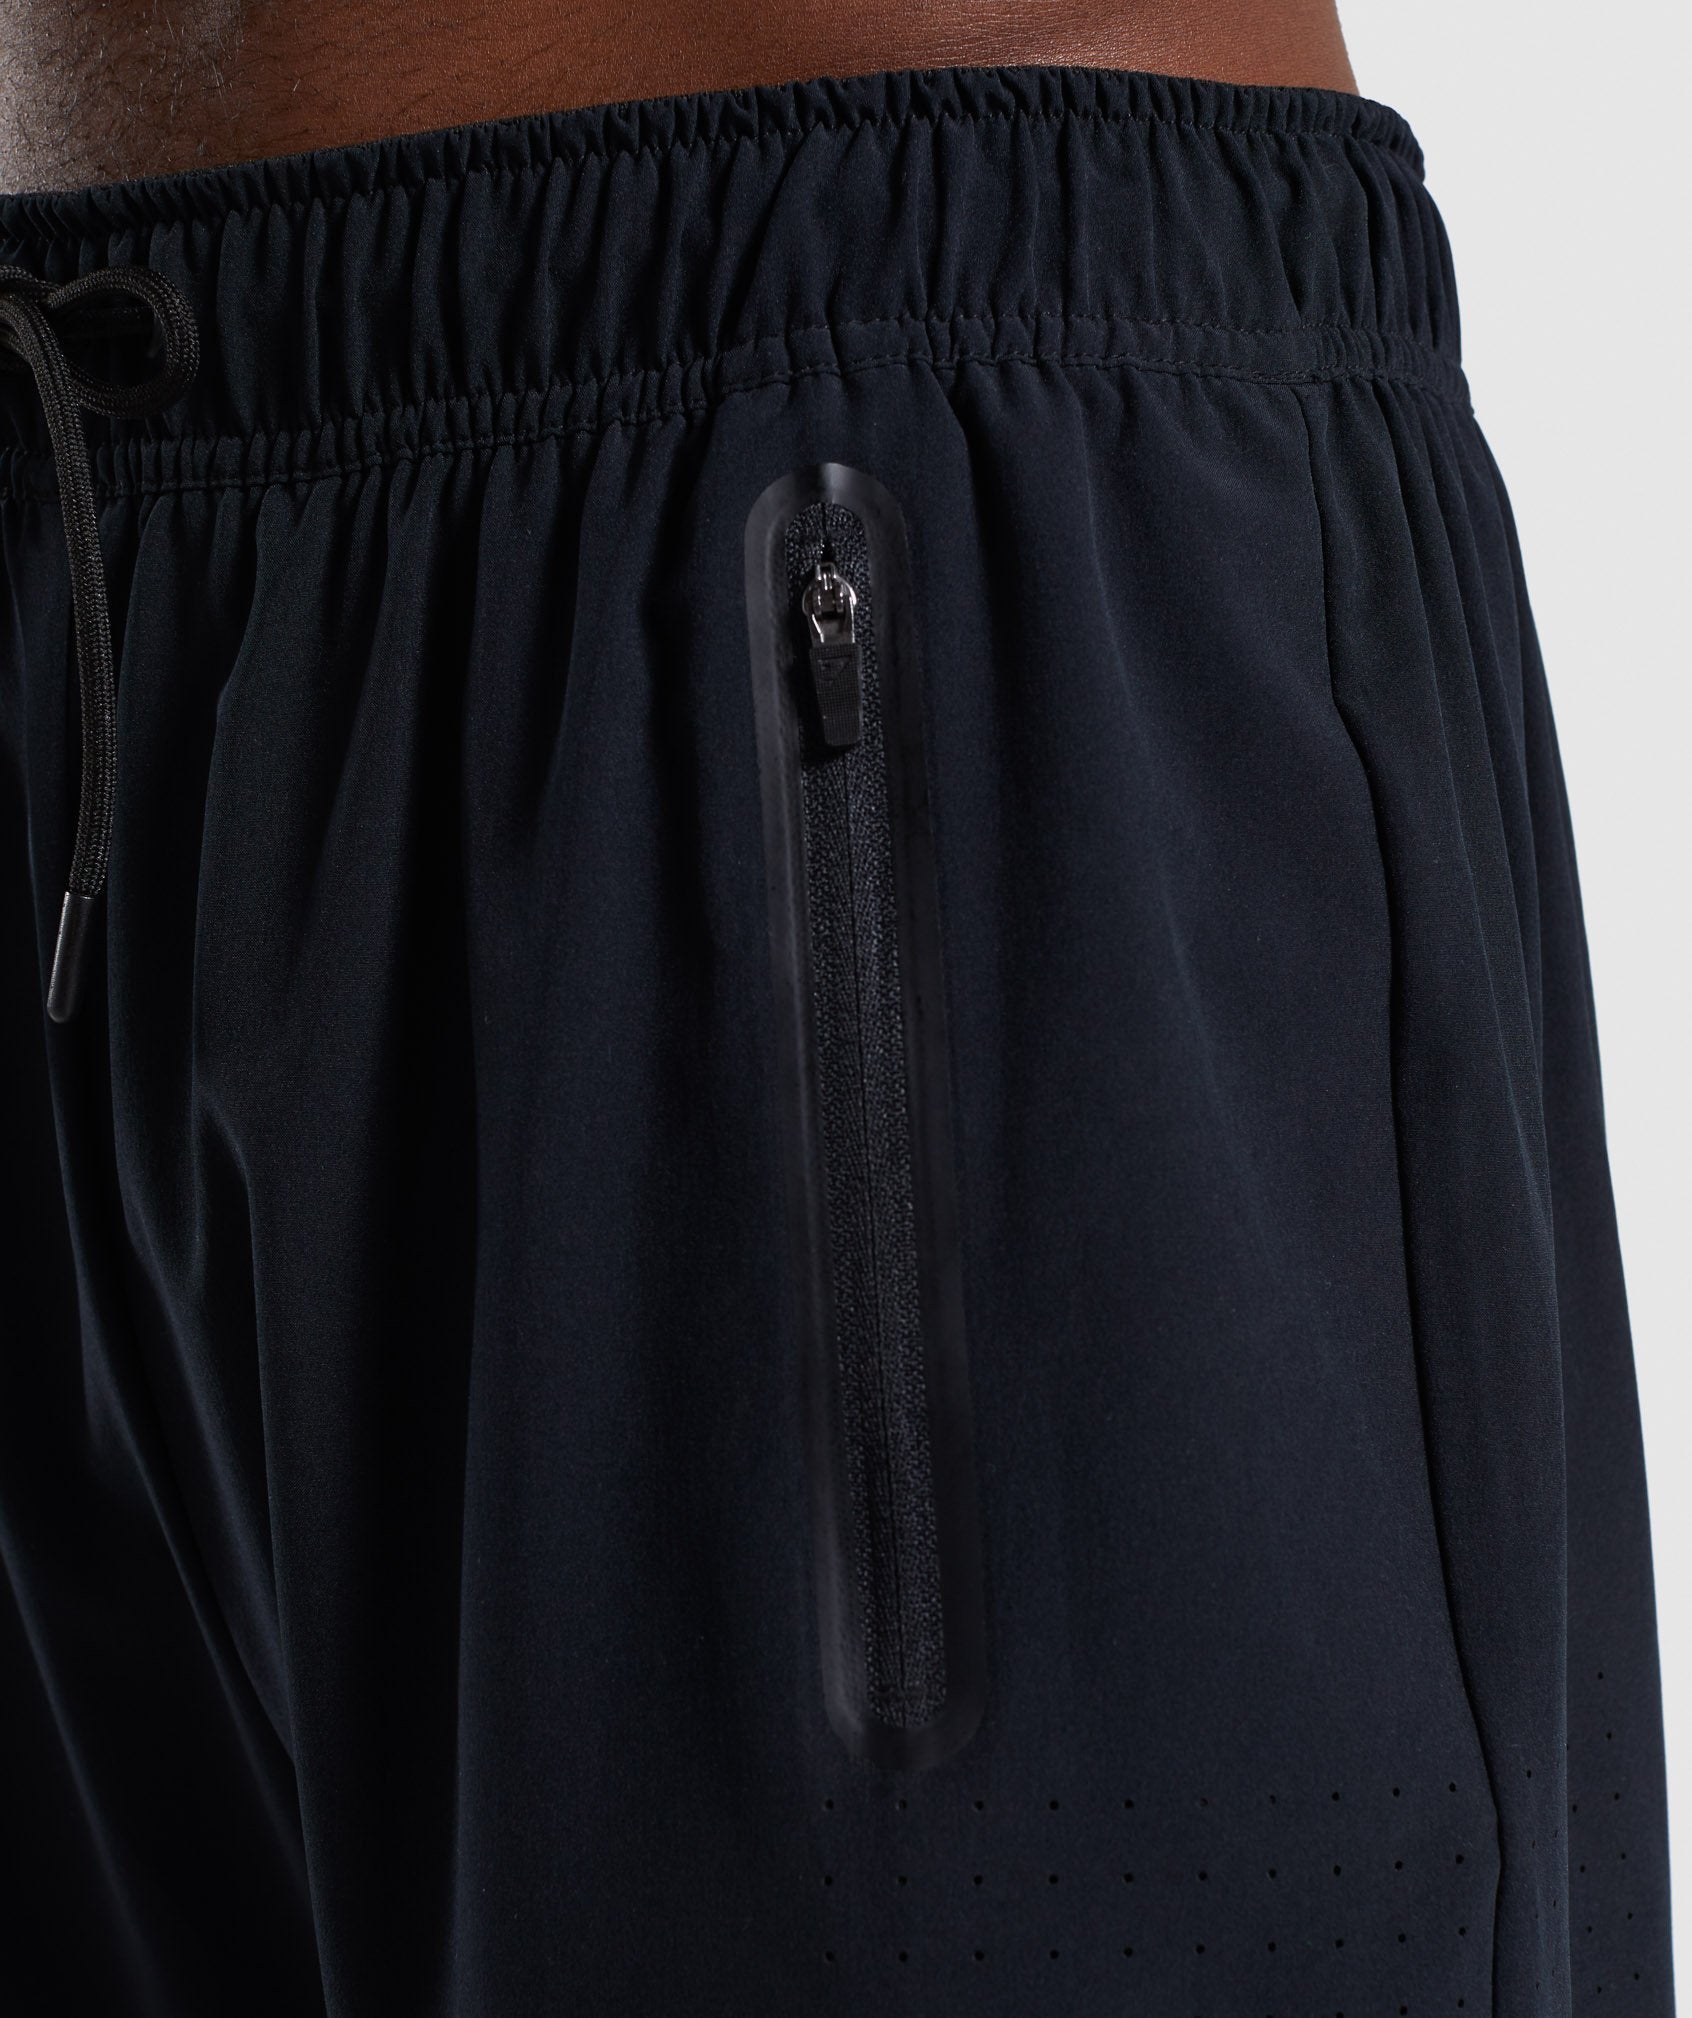 Superior 2 In 1 Training Shorts in Black/Charcoal - view 5